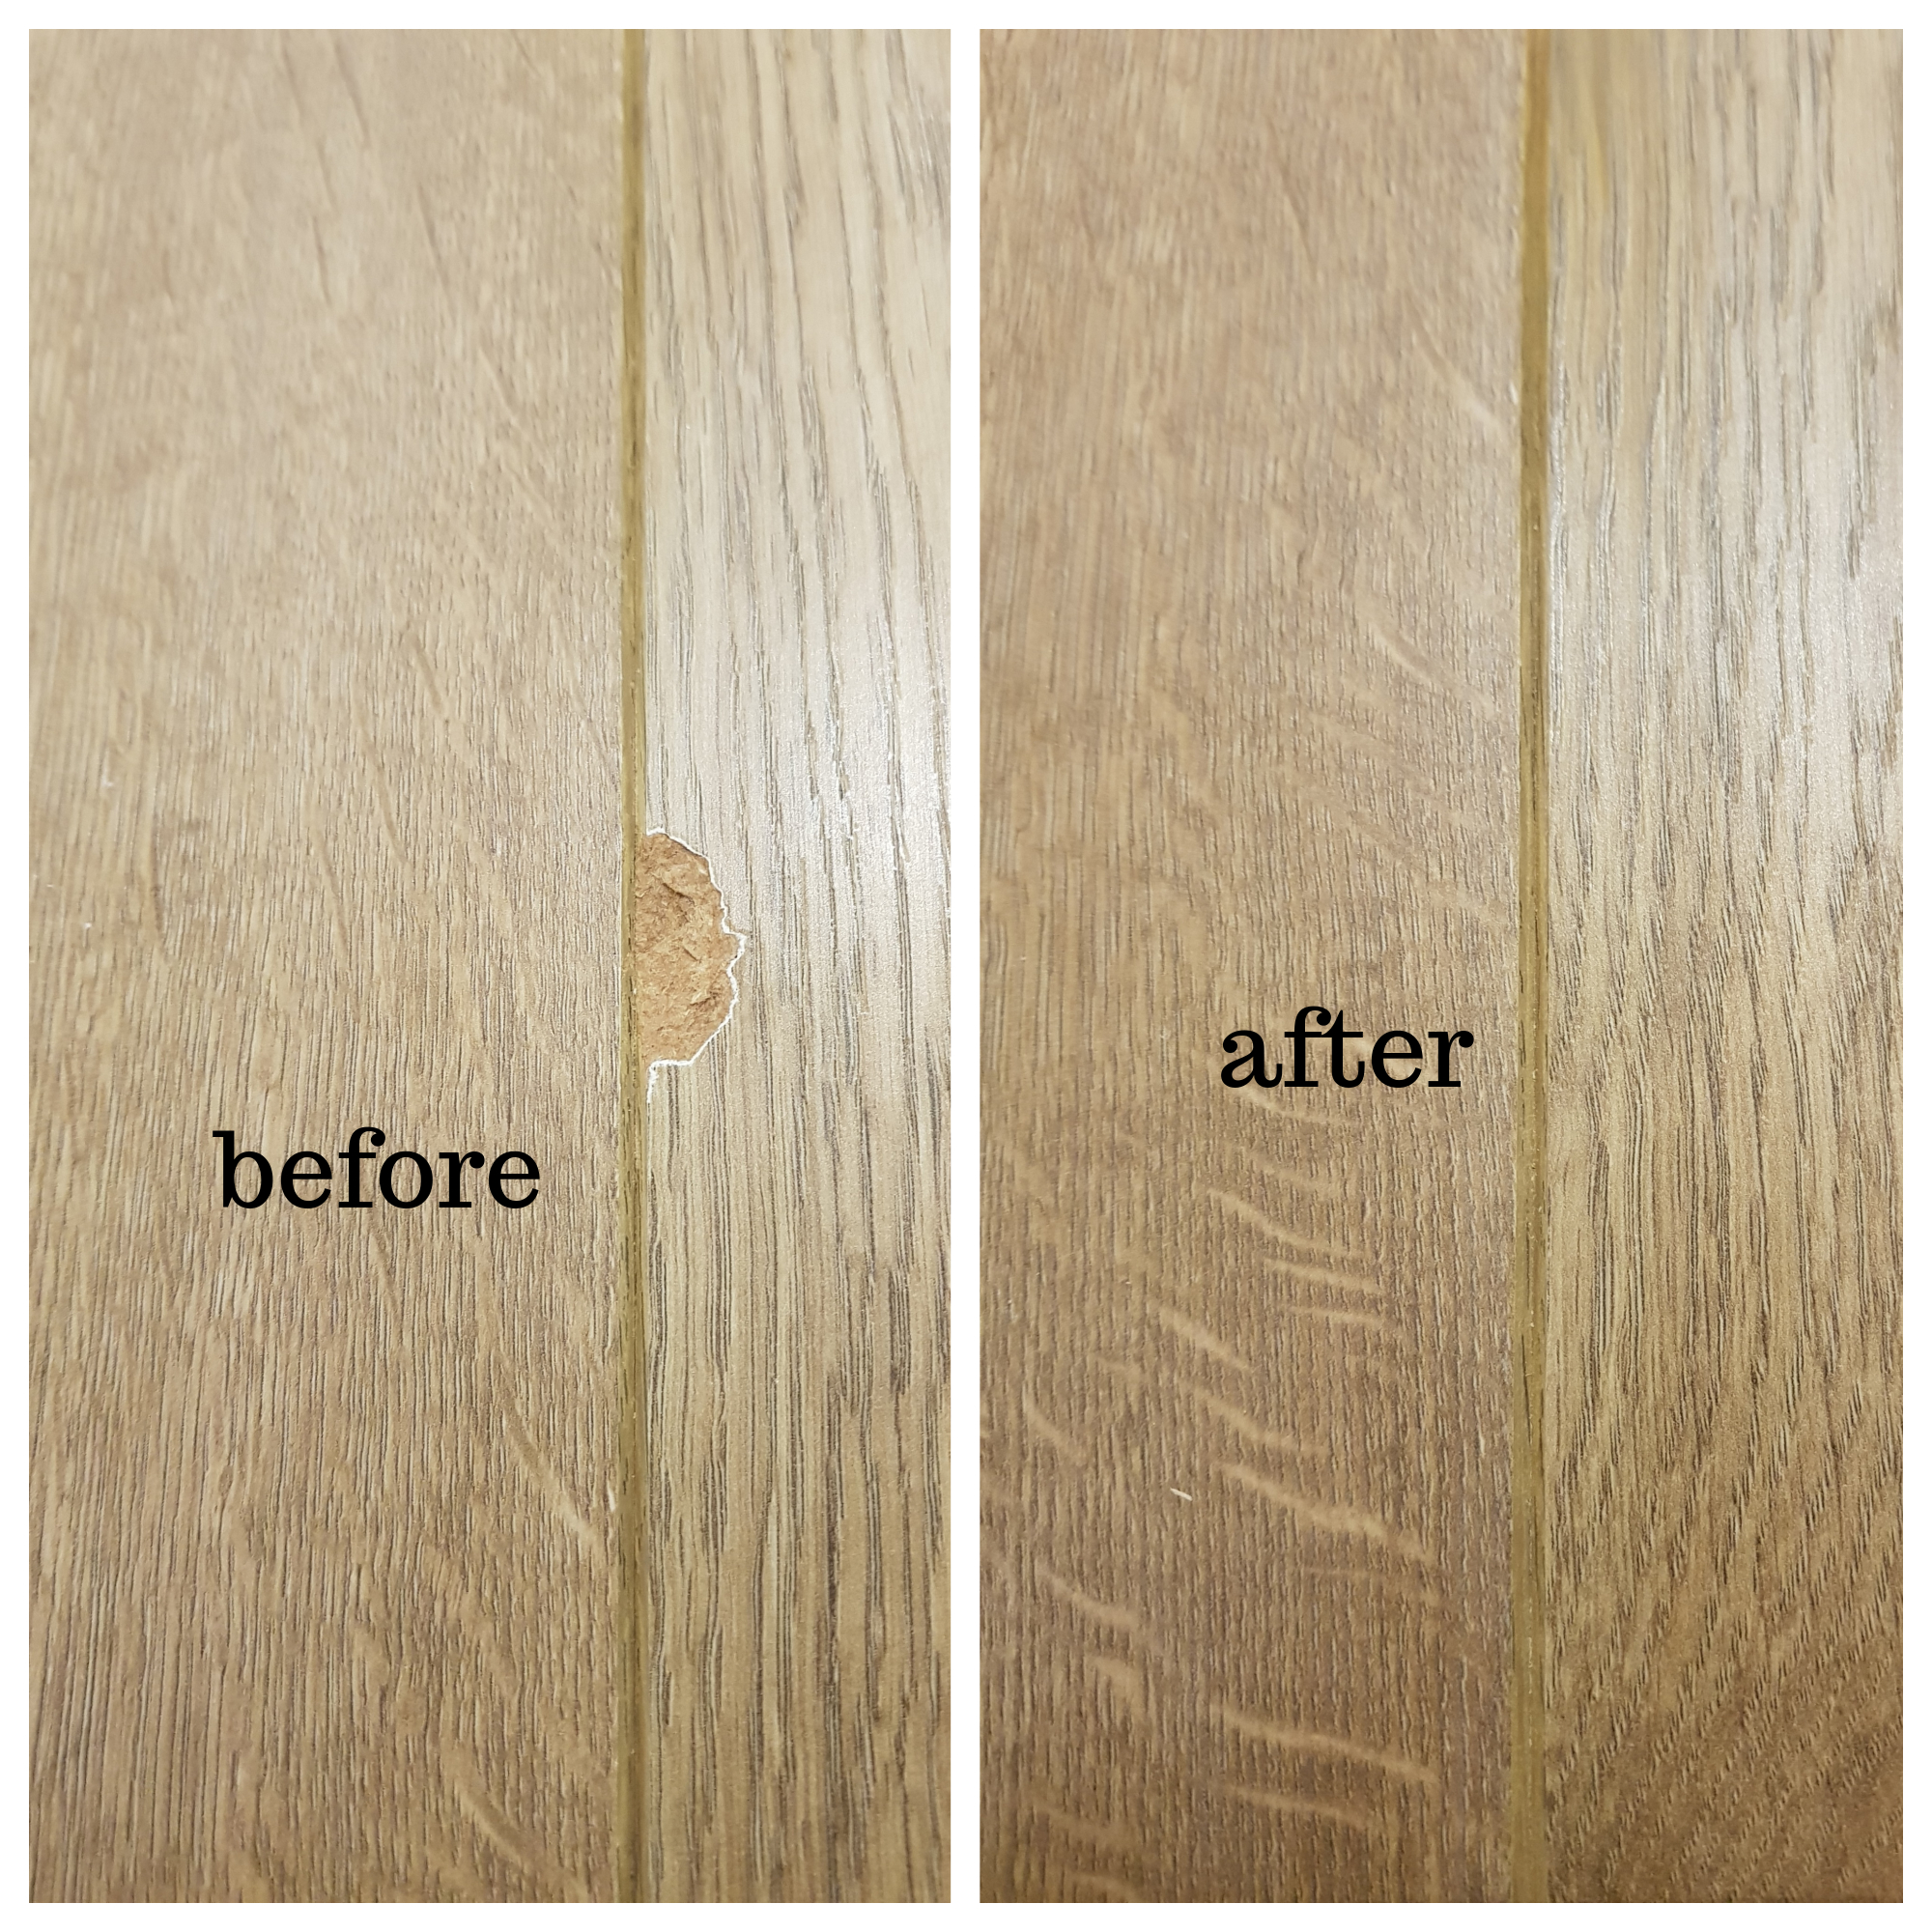 Flooring Chip Repair In London Royal, How To Fix Chips In Laminate Flooring